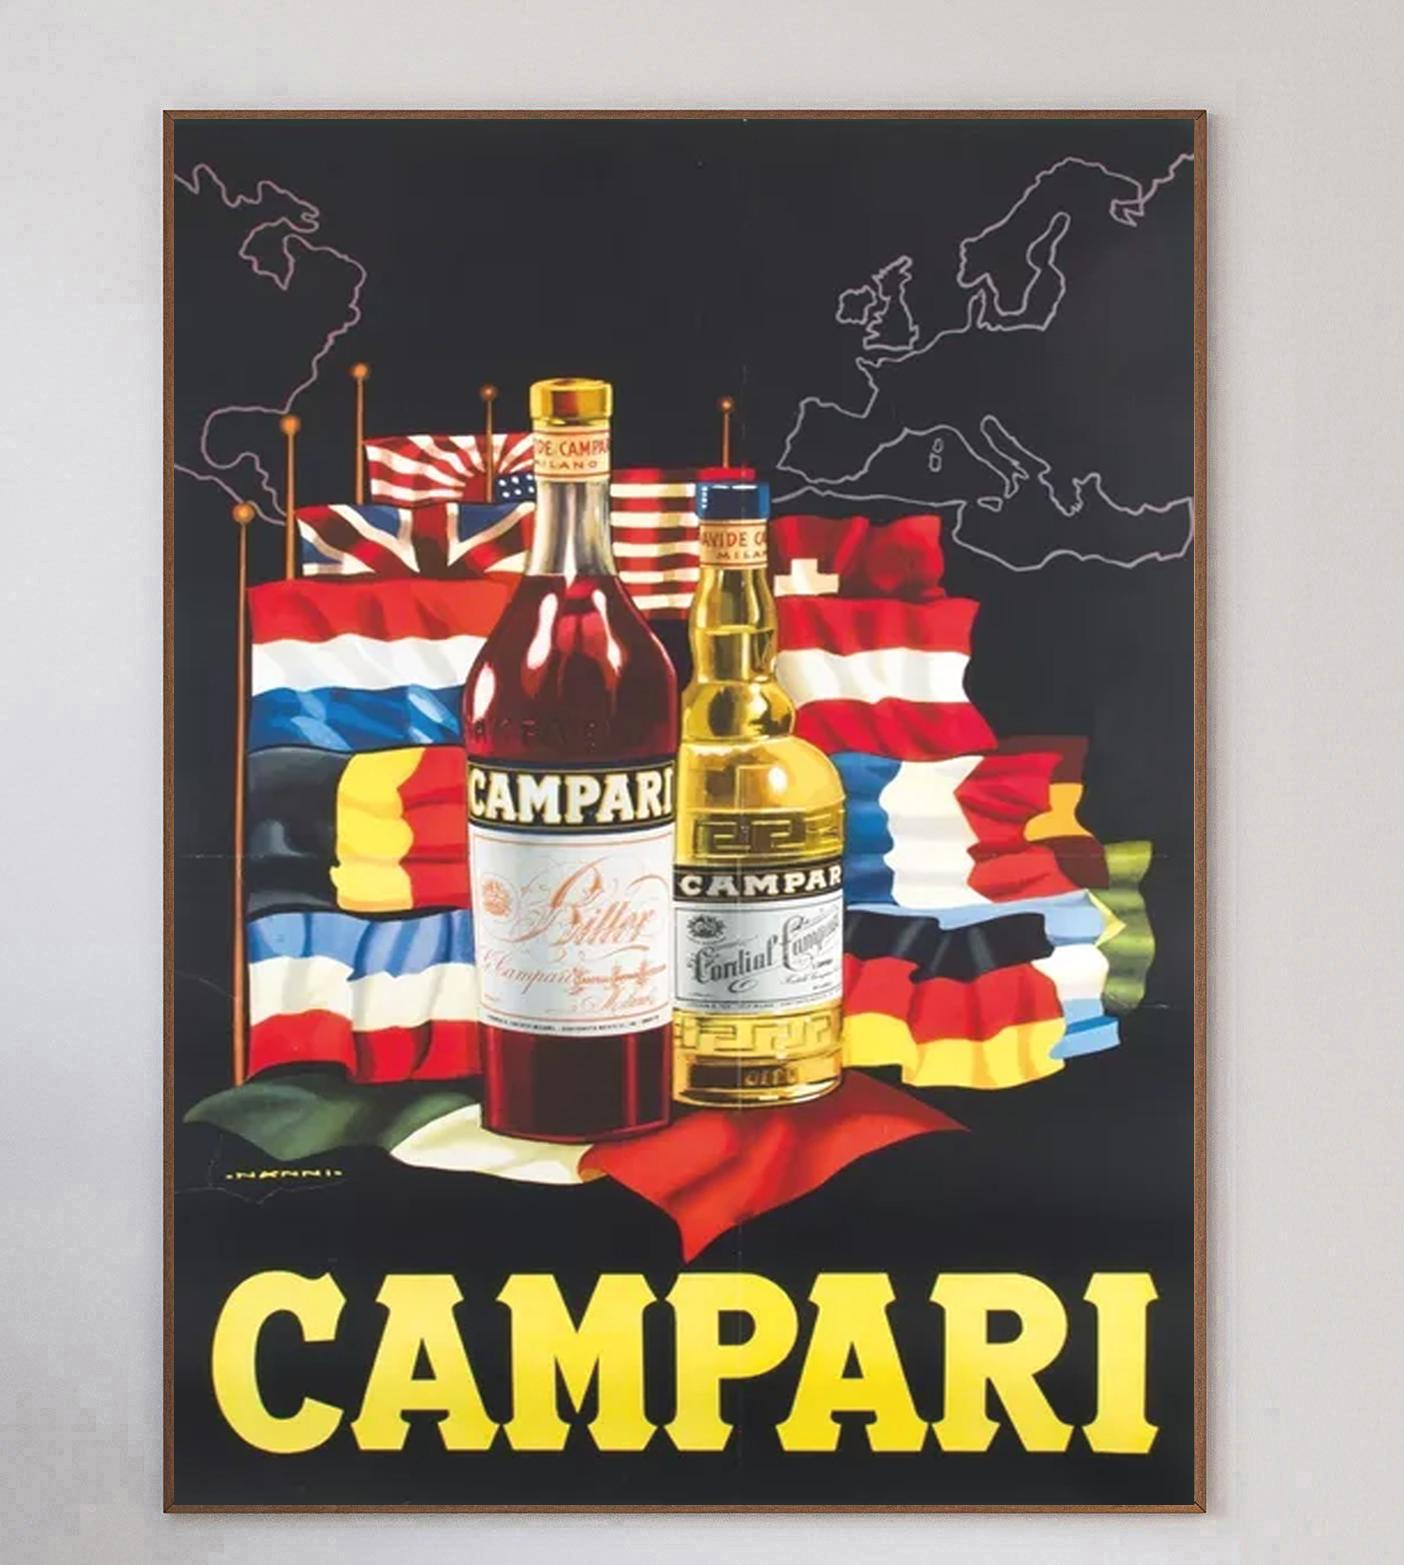 Campari was formed in 1860 by Gaspare Campari and the aperitif is as popular today as ever. His son, Davide Campari transformed the company in 1926 into what it is widely known for today. This gorgeous lithographic poster was created in 1950 with